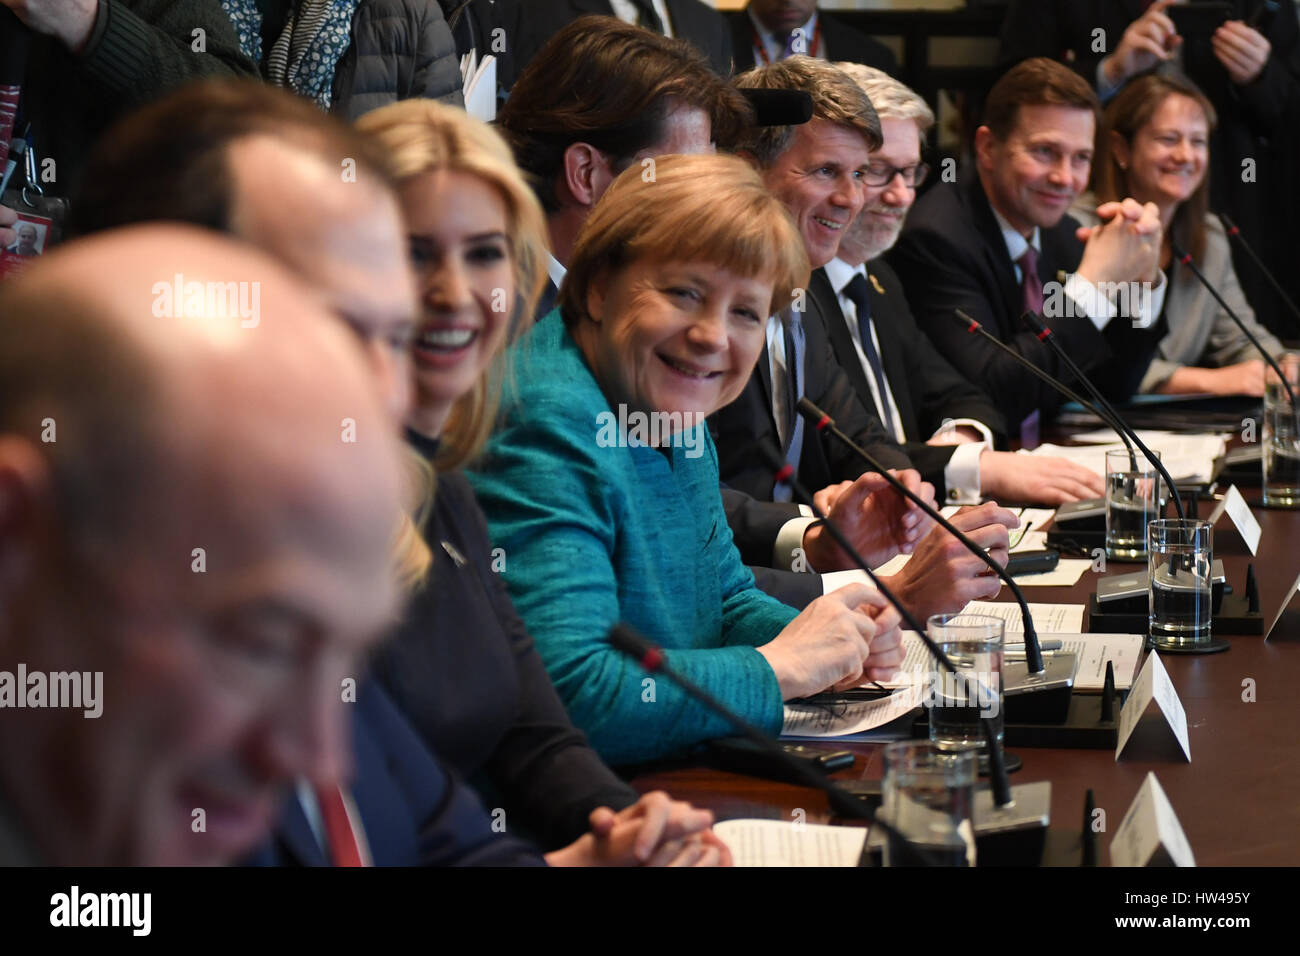 German Chancellor Angela Merkel (C), with Ivanka Trump (left center), smiles during a roundtable discussion on vocational training with United States and German business leaders, lead by President Donald Trump (not seen), in the Cabinet Room of the White House in Washington, DC on March 17, 2017. Credit: Photo by Pat Benic/Pool via CNP /MediaPunch Stock Photo